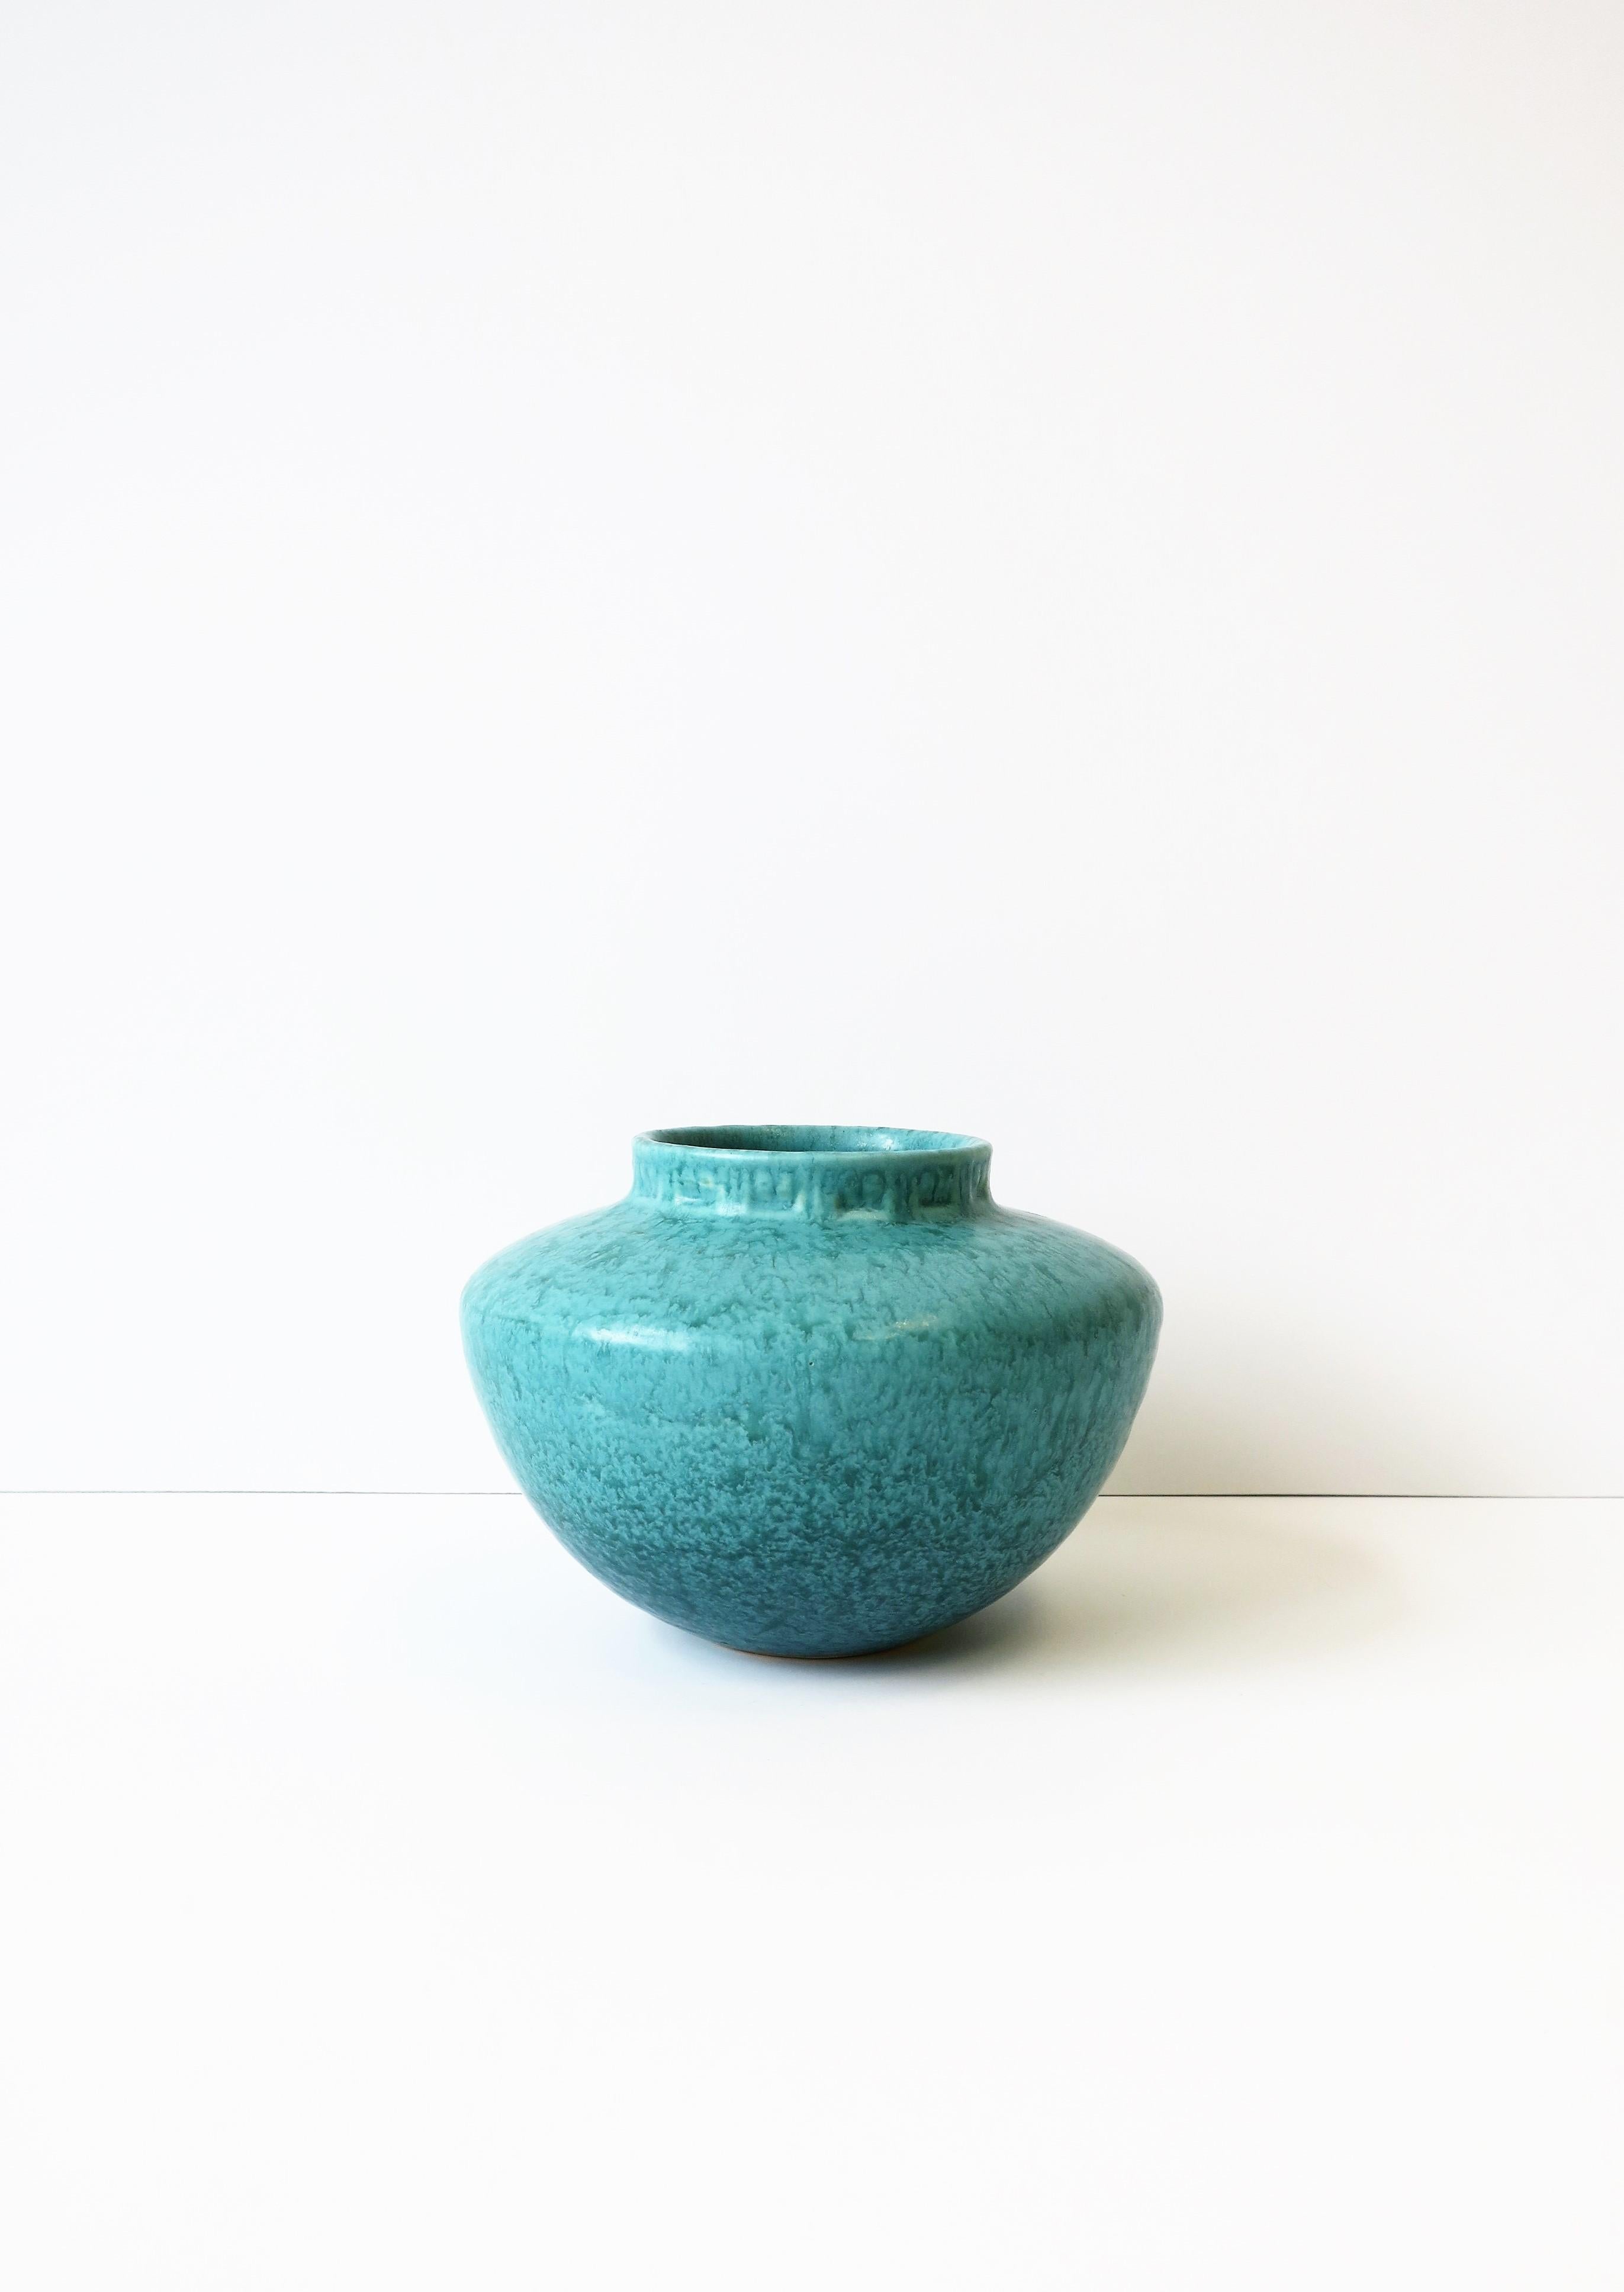 American Modern Turquoise Blue Pottery Vase, circa early 20th century